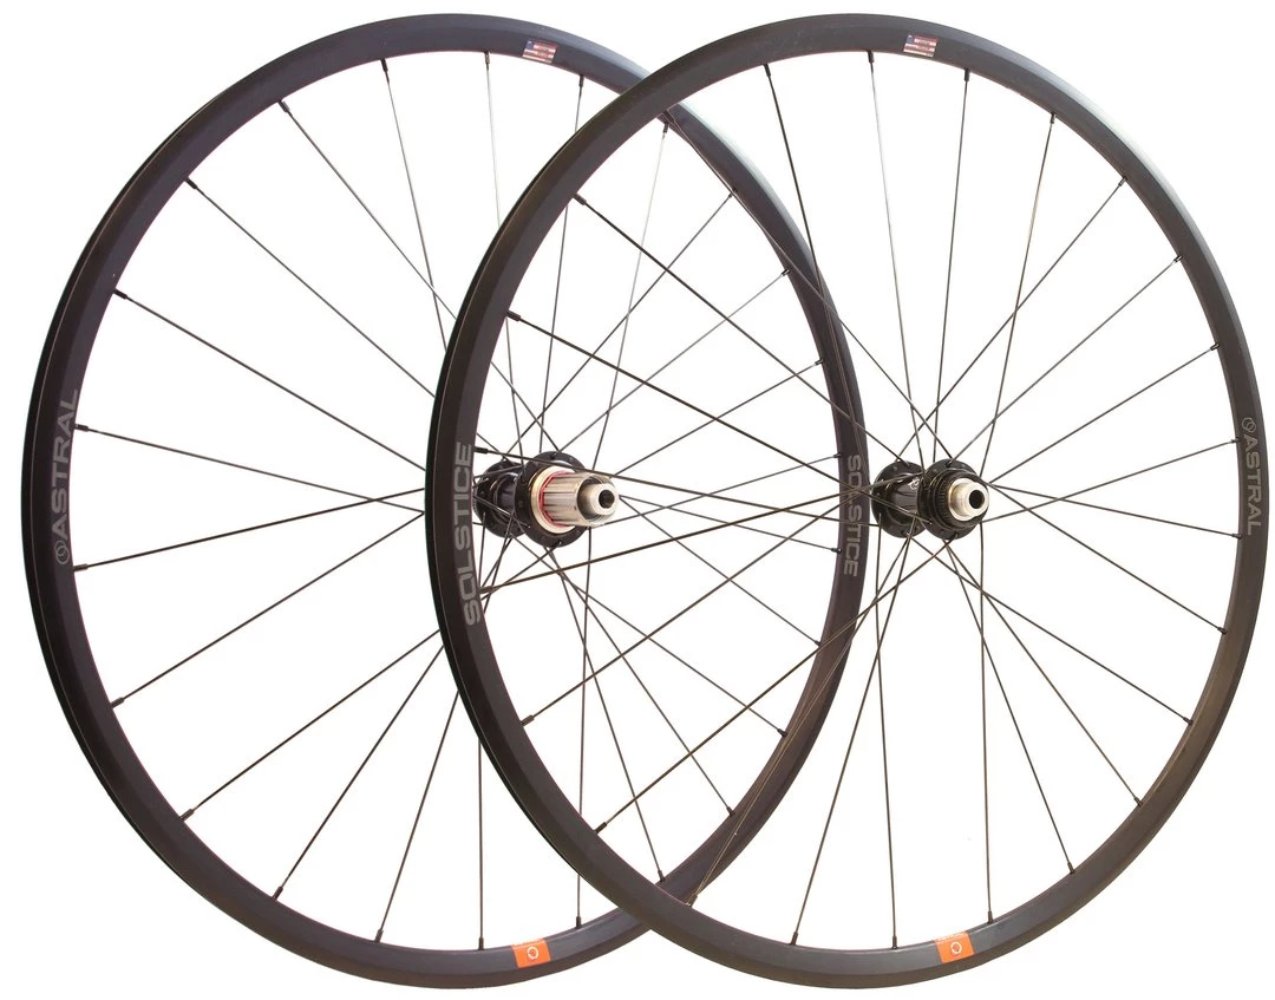 SOLSTICE DISC WHEELSET, ASTRAL APPROACH HUBS